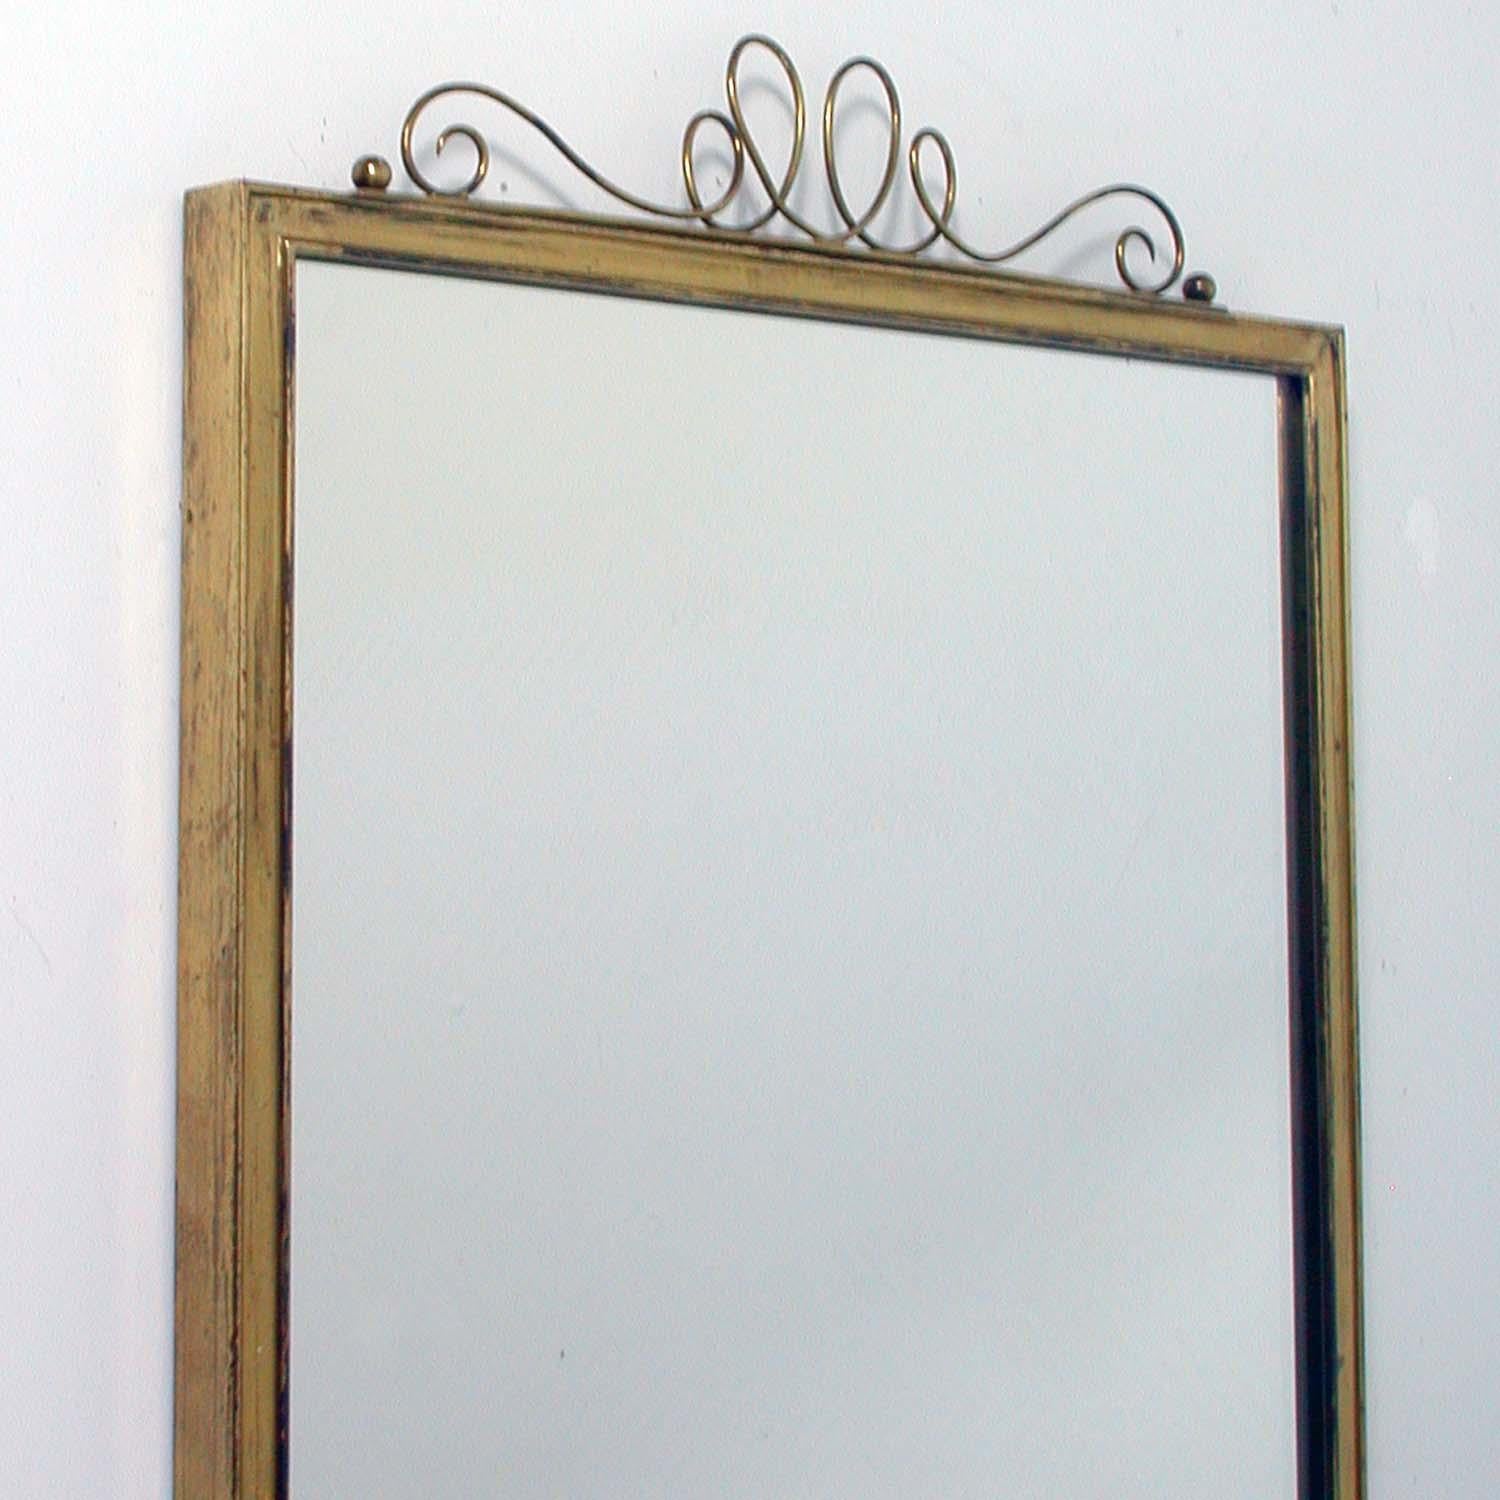 Midcentury Brass Wall Mirror, 1950s For Sale 4